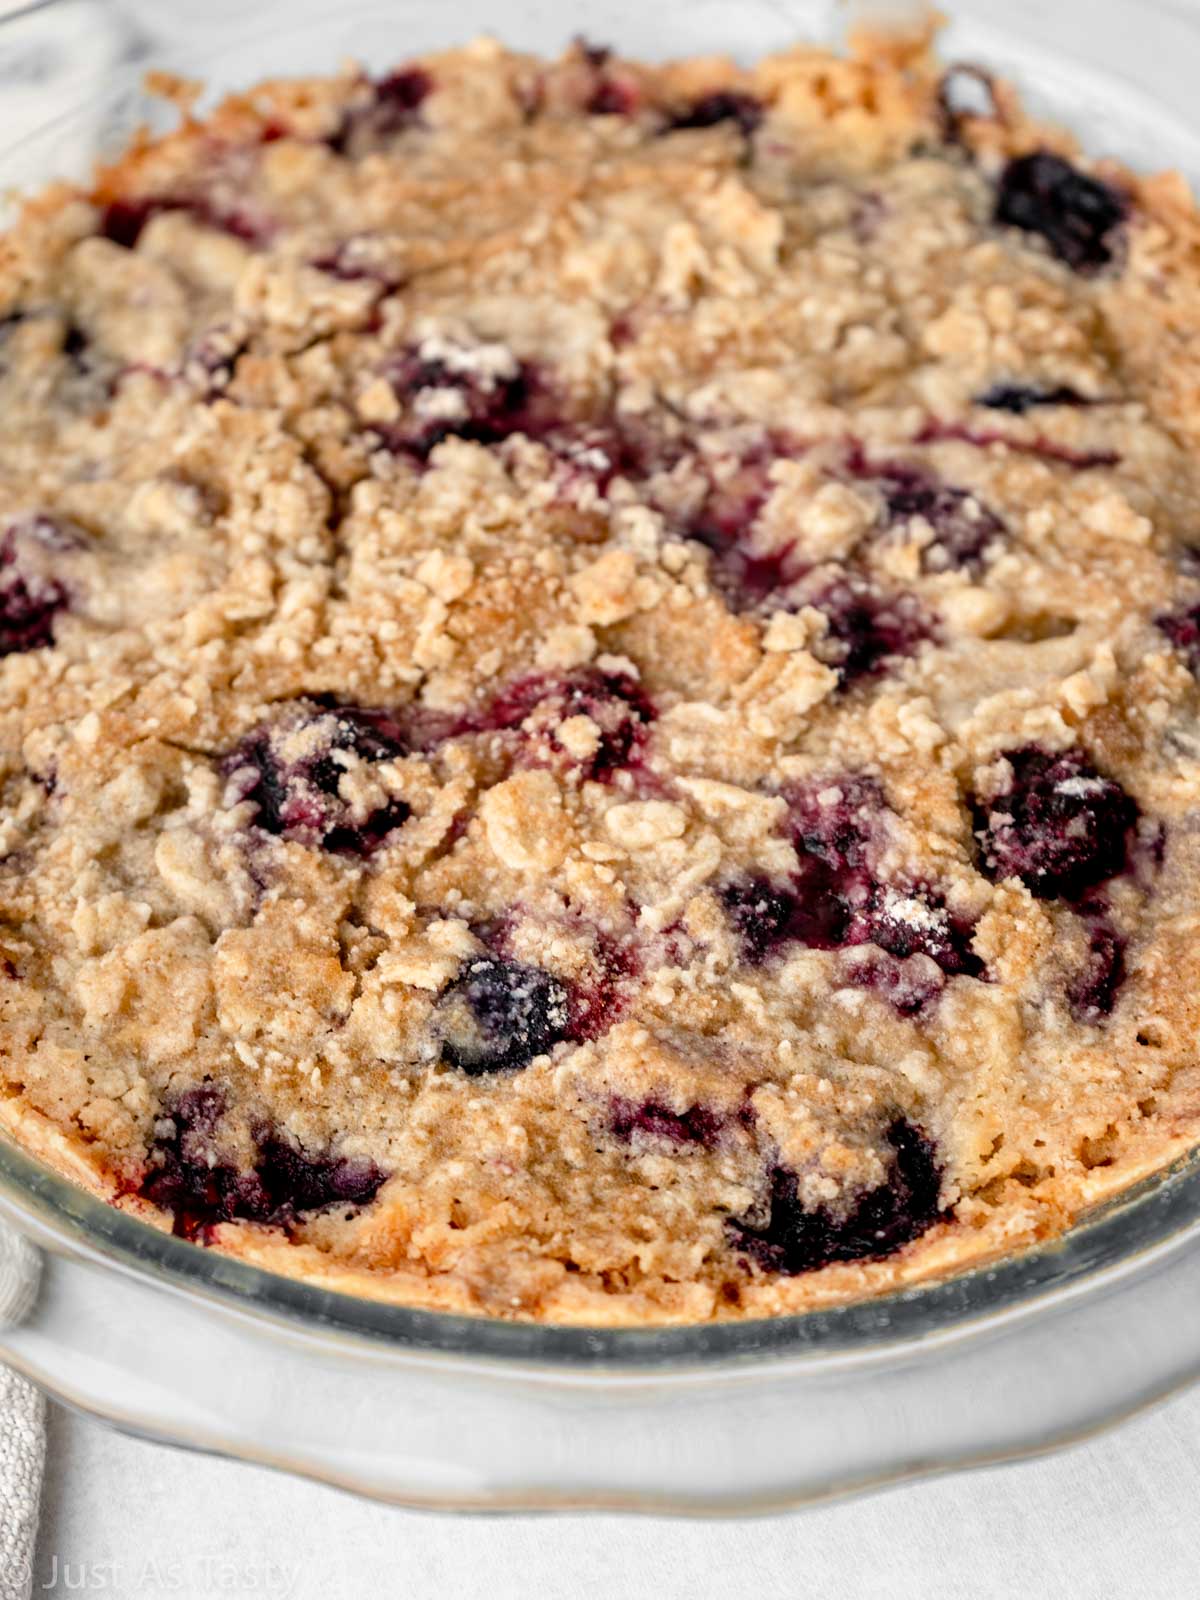 Close-up of blackberry pie with crumble topping.